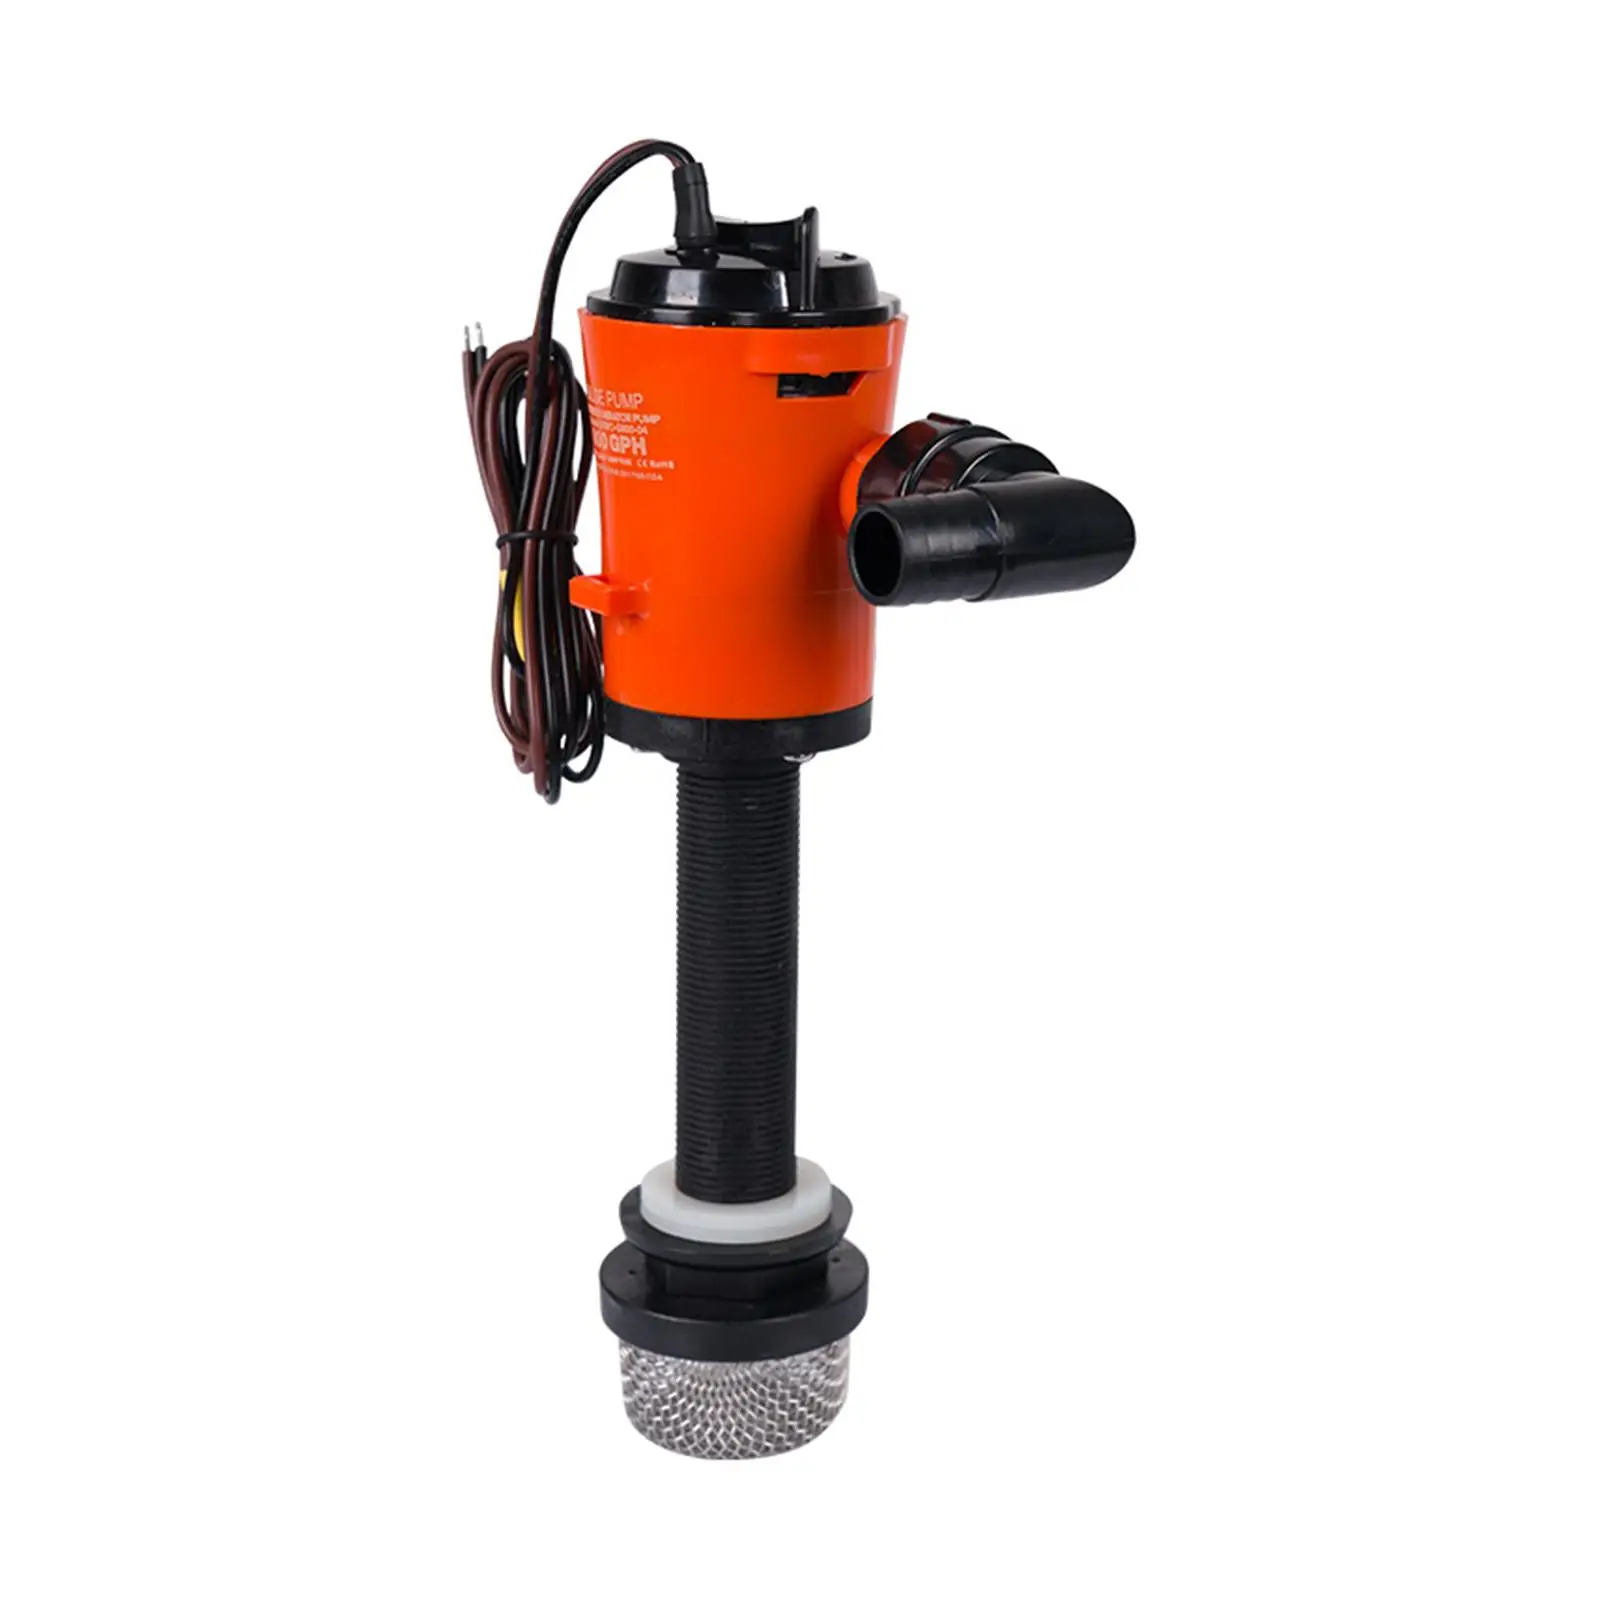 Livewell Pump Boat Tools Professional Easy to Install Boat Aerator Pump